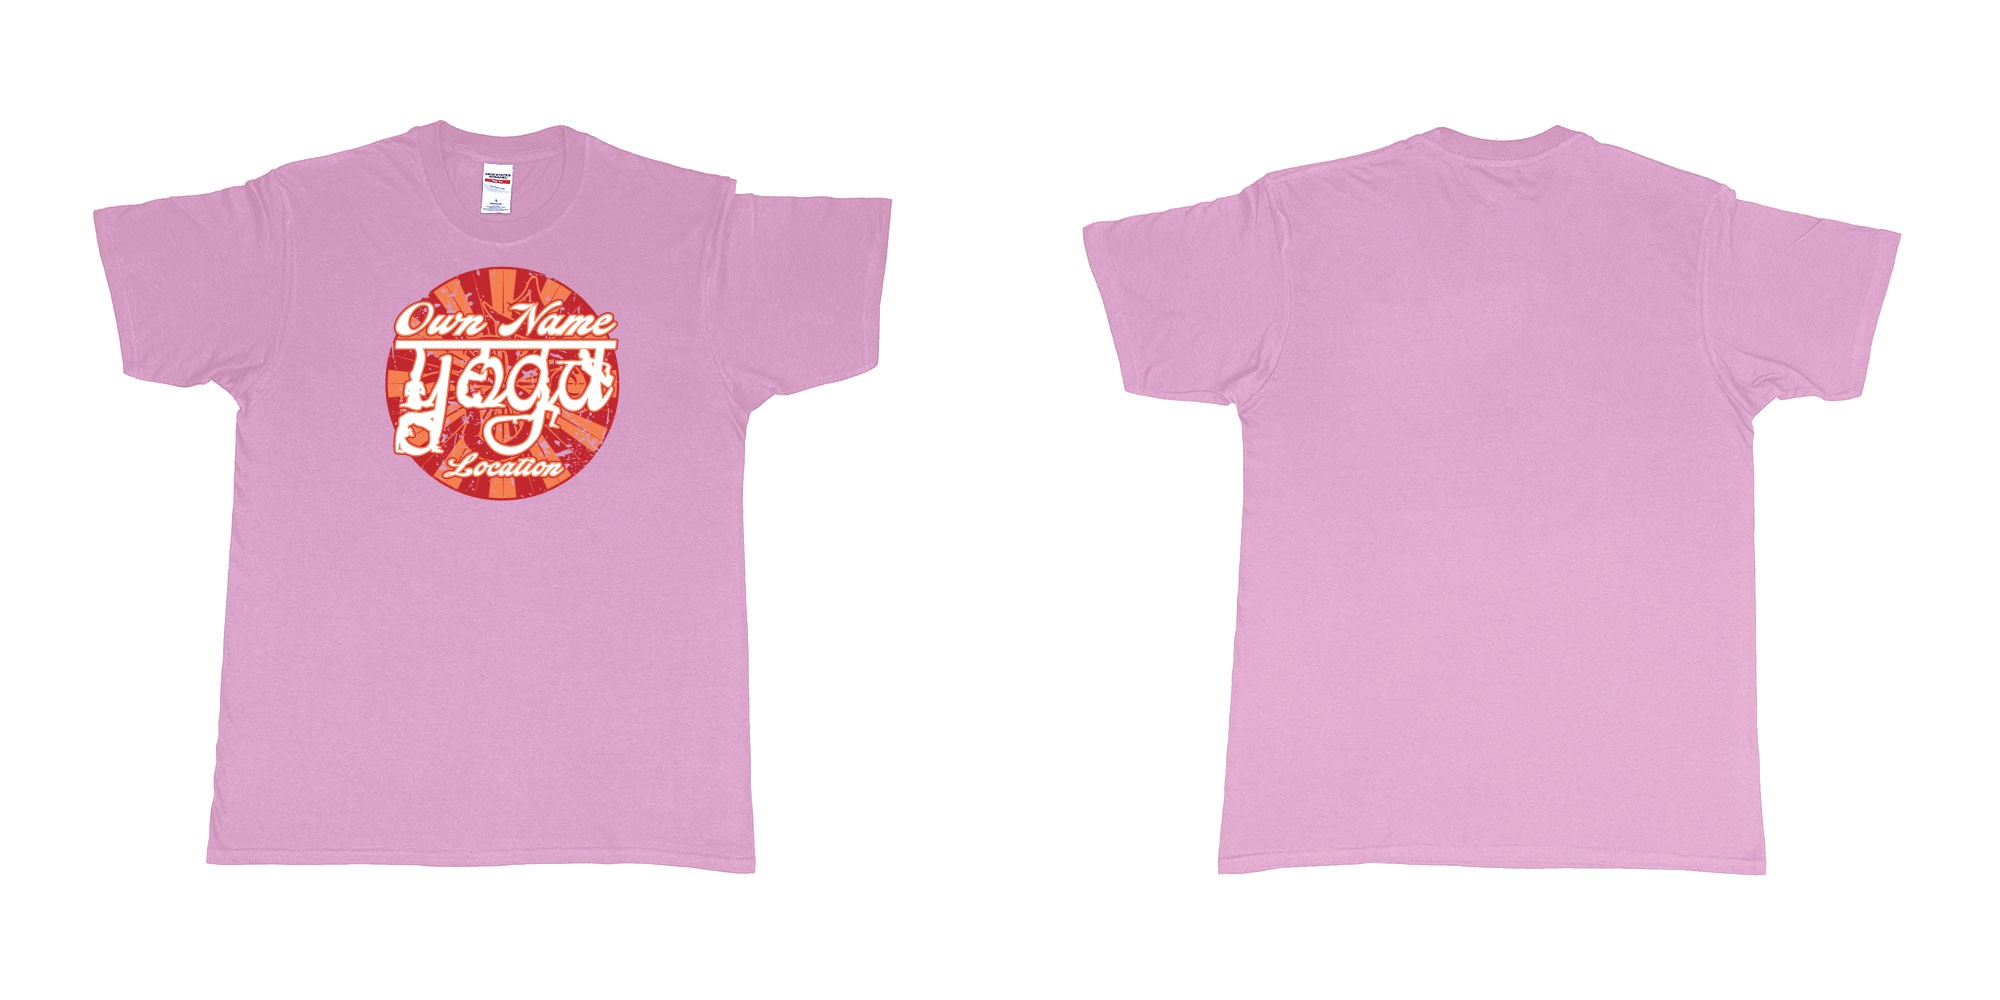 Custom tshirt design personalized yoga om sun retro own studio name location printing bali in fabric color light-pink choice your own text made in Bali by The Pirate Way